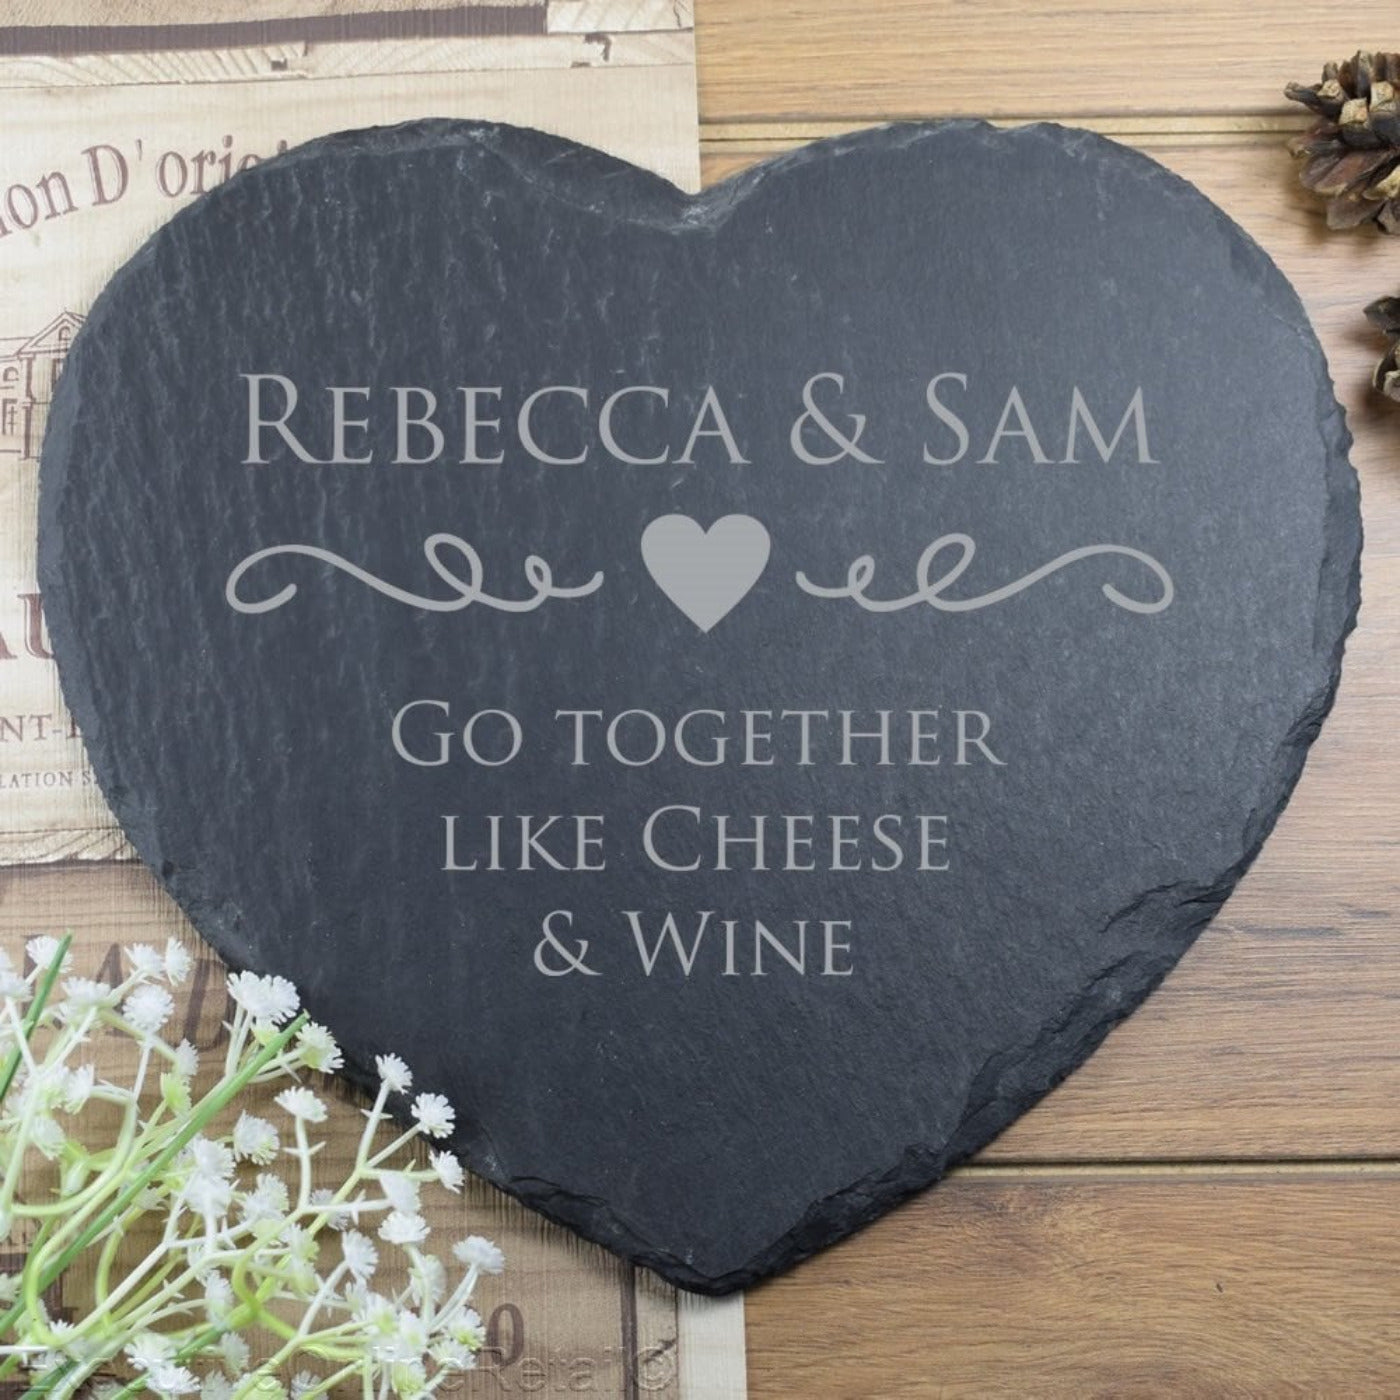 Personalised Engraved Heart Slate Placemat, Cheese and Wine, Platter, Cheeseboard, Valentines Gift, Wedding Gift, Housewarming, Couples